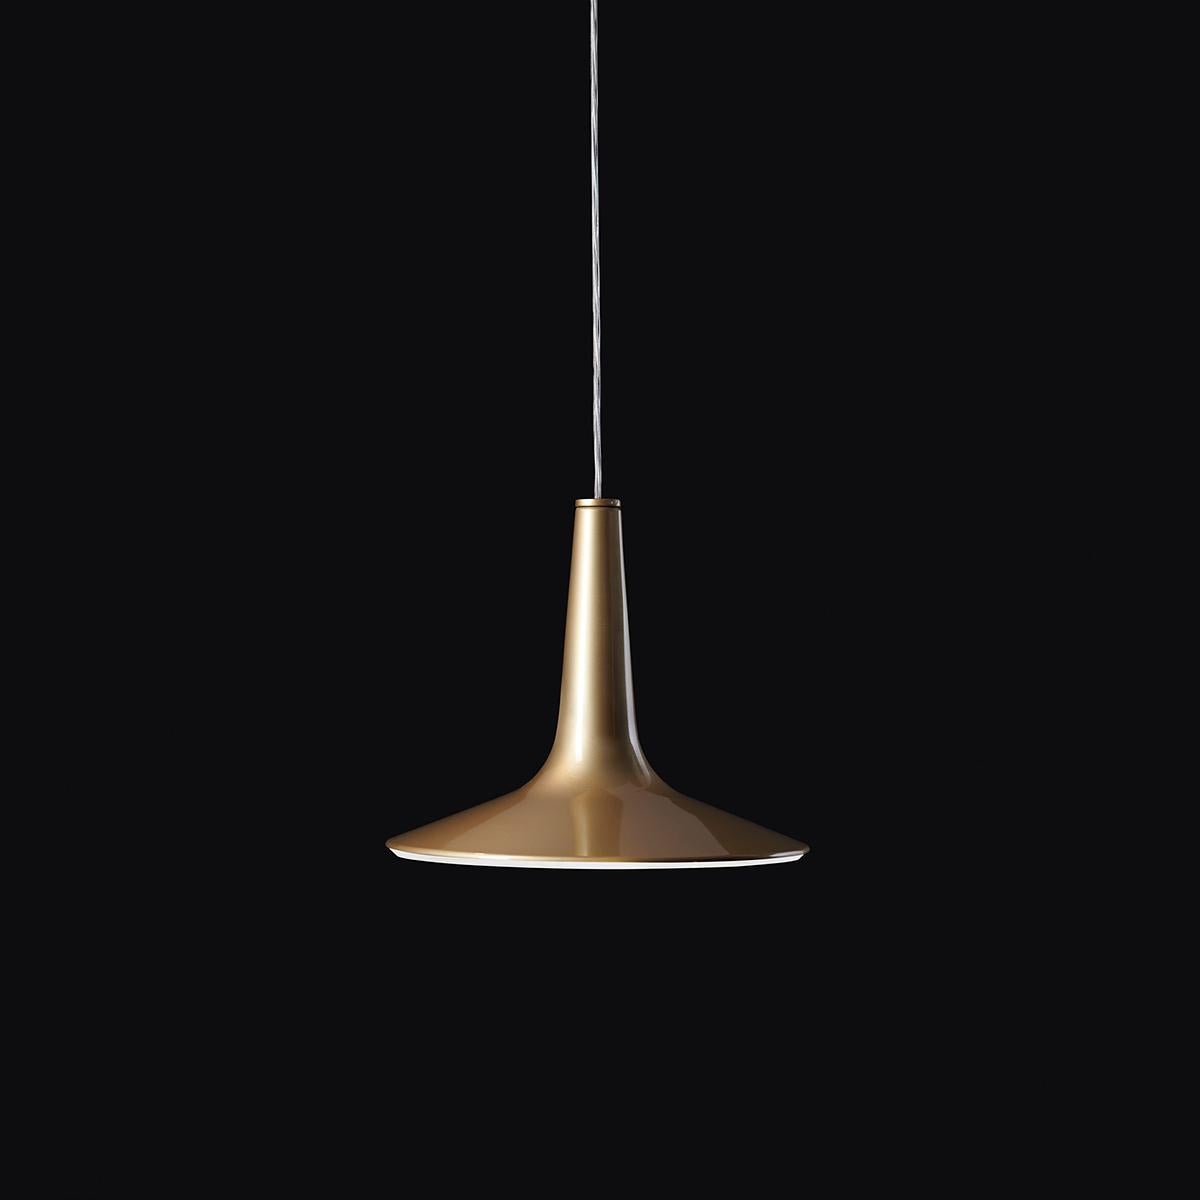 Suspension Lamp 'Kin' 479 designed by Francesco Rota in 2013.
Suspension lamp giving direct and diffused light. Metal turned body lamp. PMMA transparent diffuser. Manufactured by Oluce, Italy.

A cast aluminium body with a Led core are the